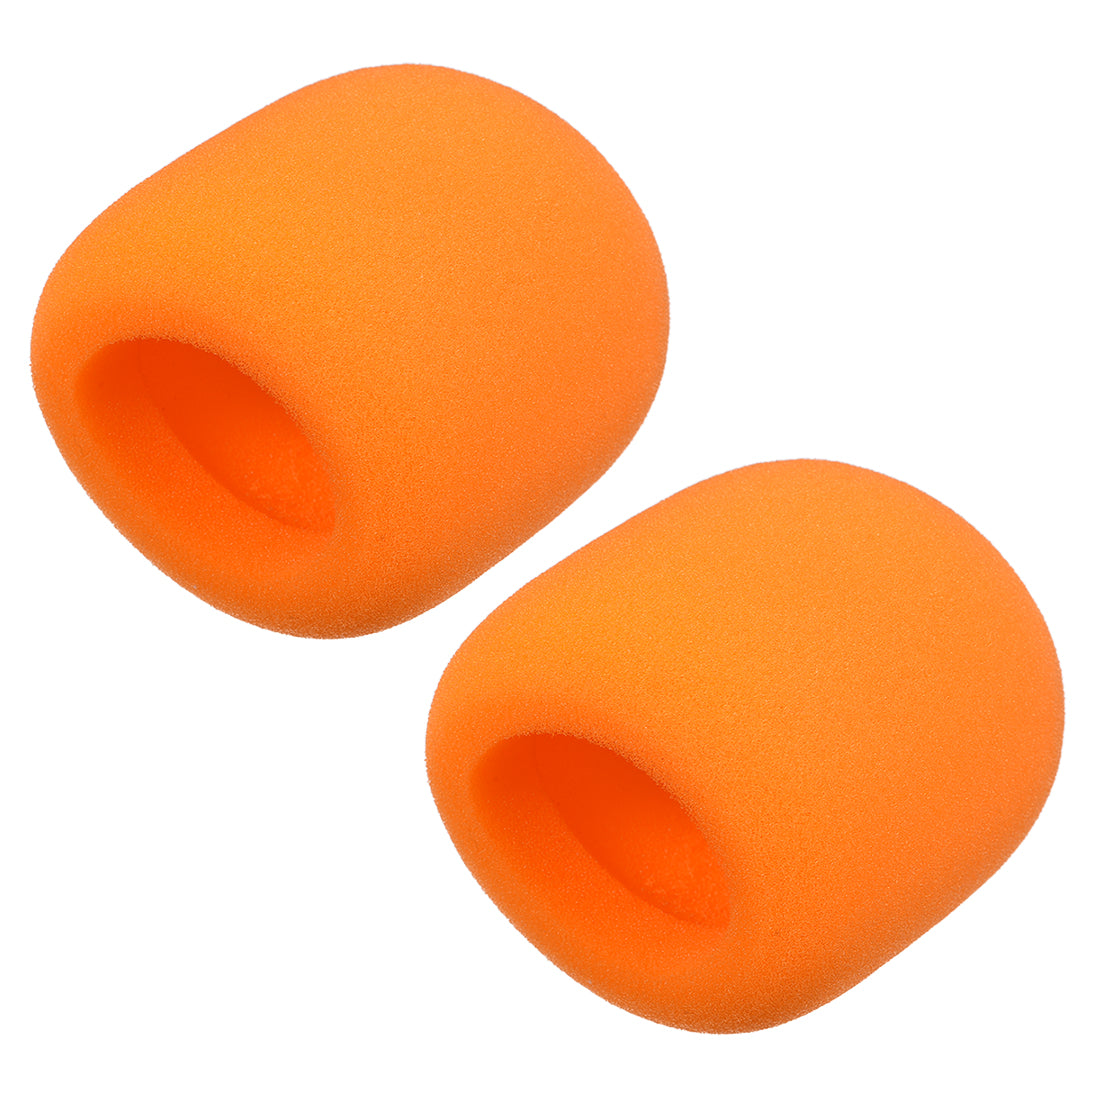 uxcell Uxcell 2PCS Thicken Sponge Foam Mic Cover Handheld Microphone Windscreen Orange for KTV